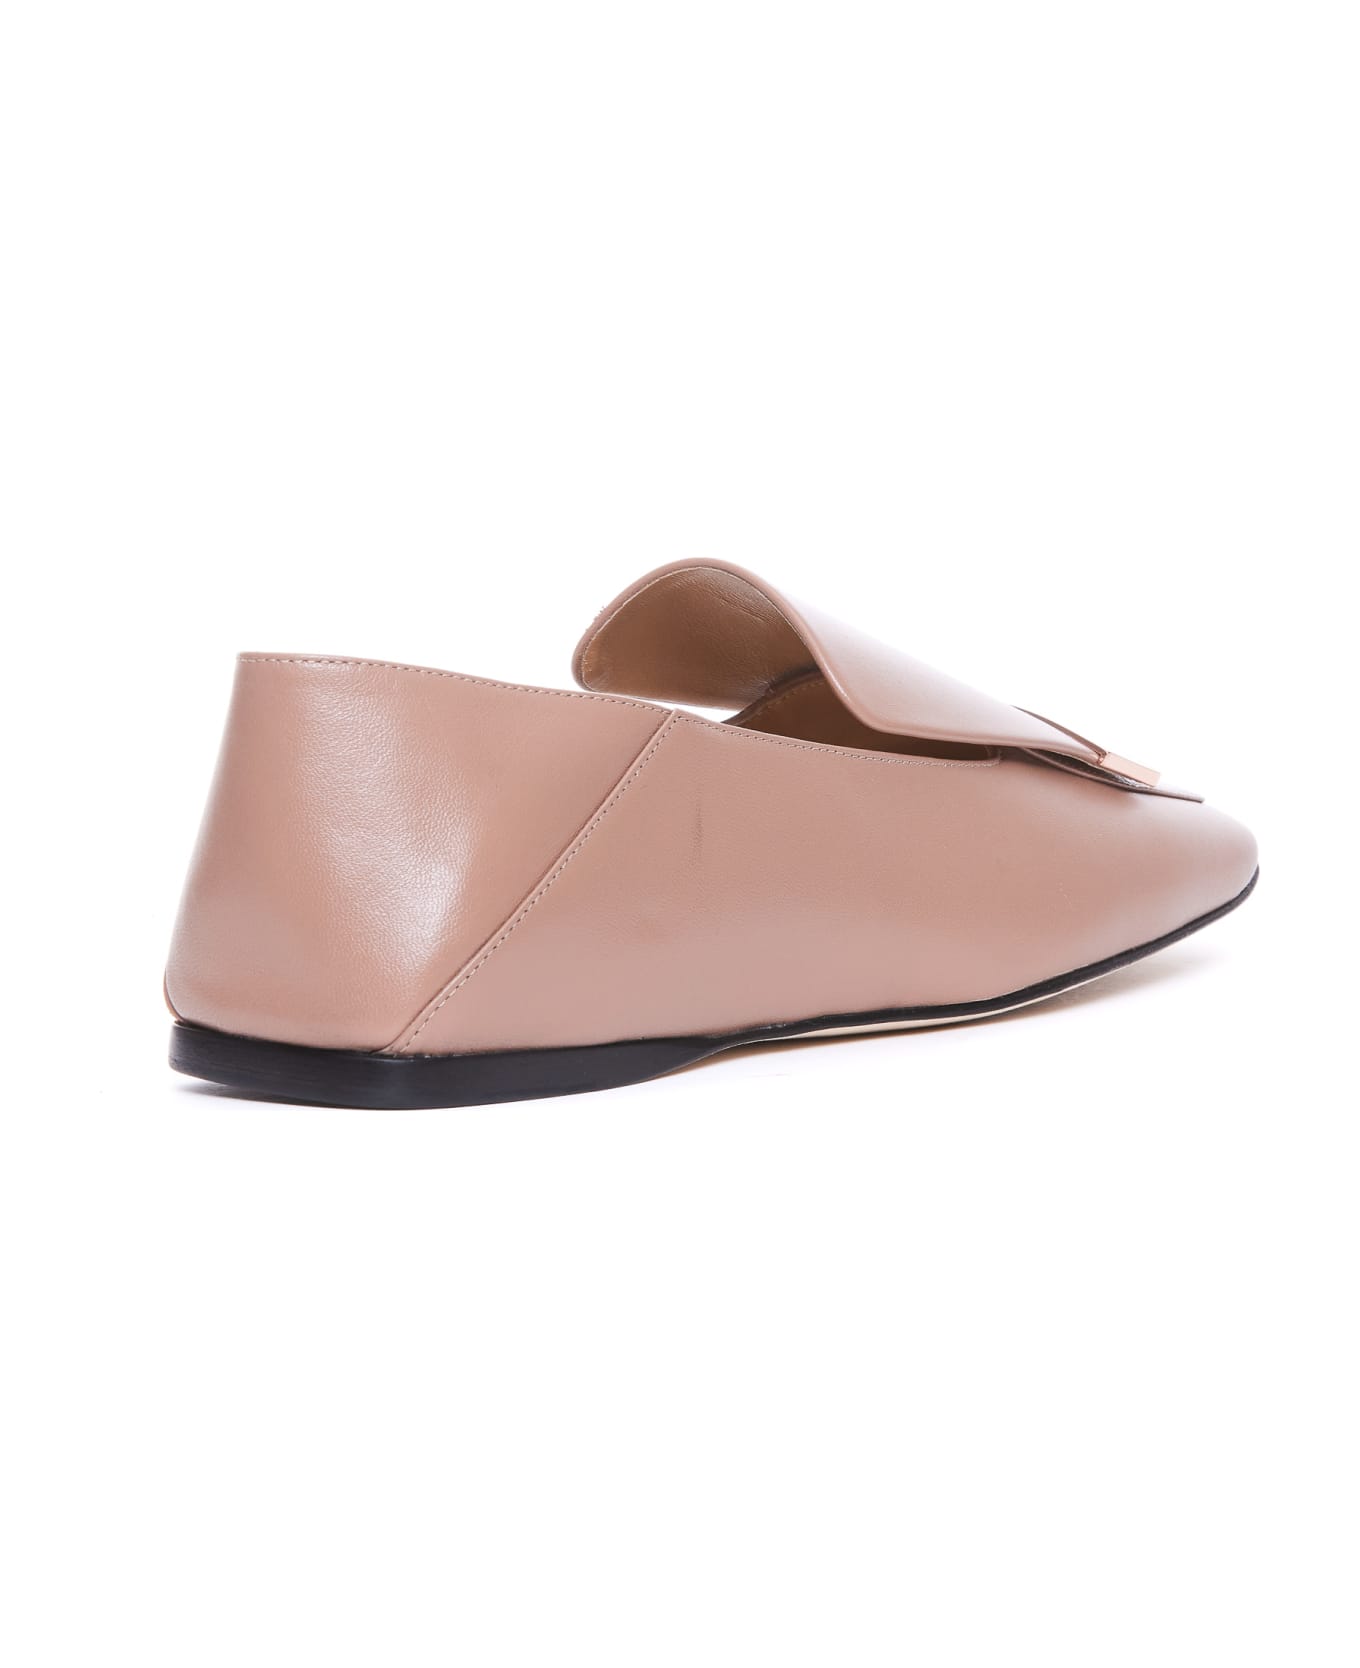 Sergio Rossi Sr1 Loafers - Pink